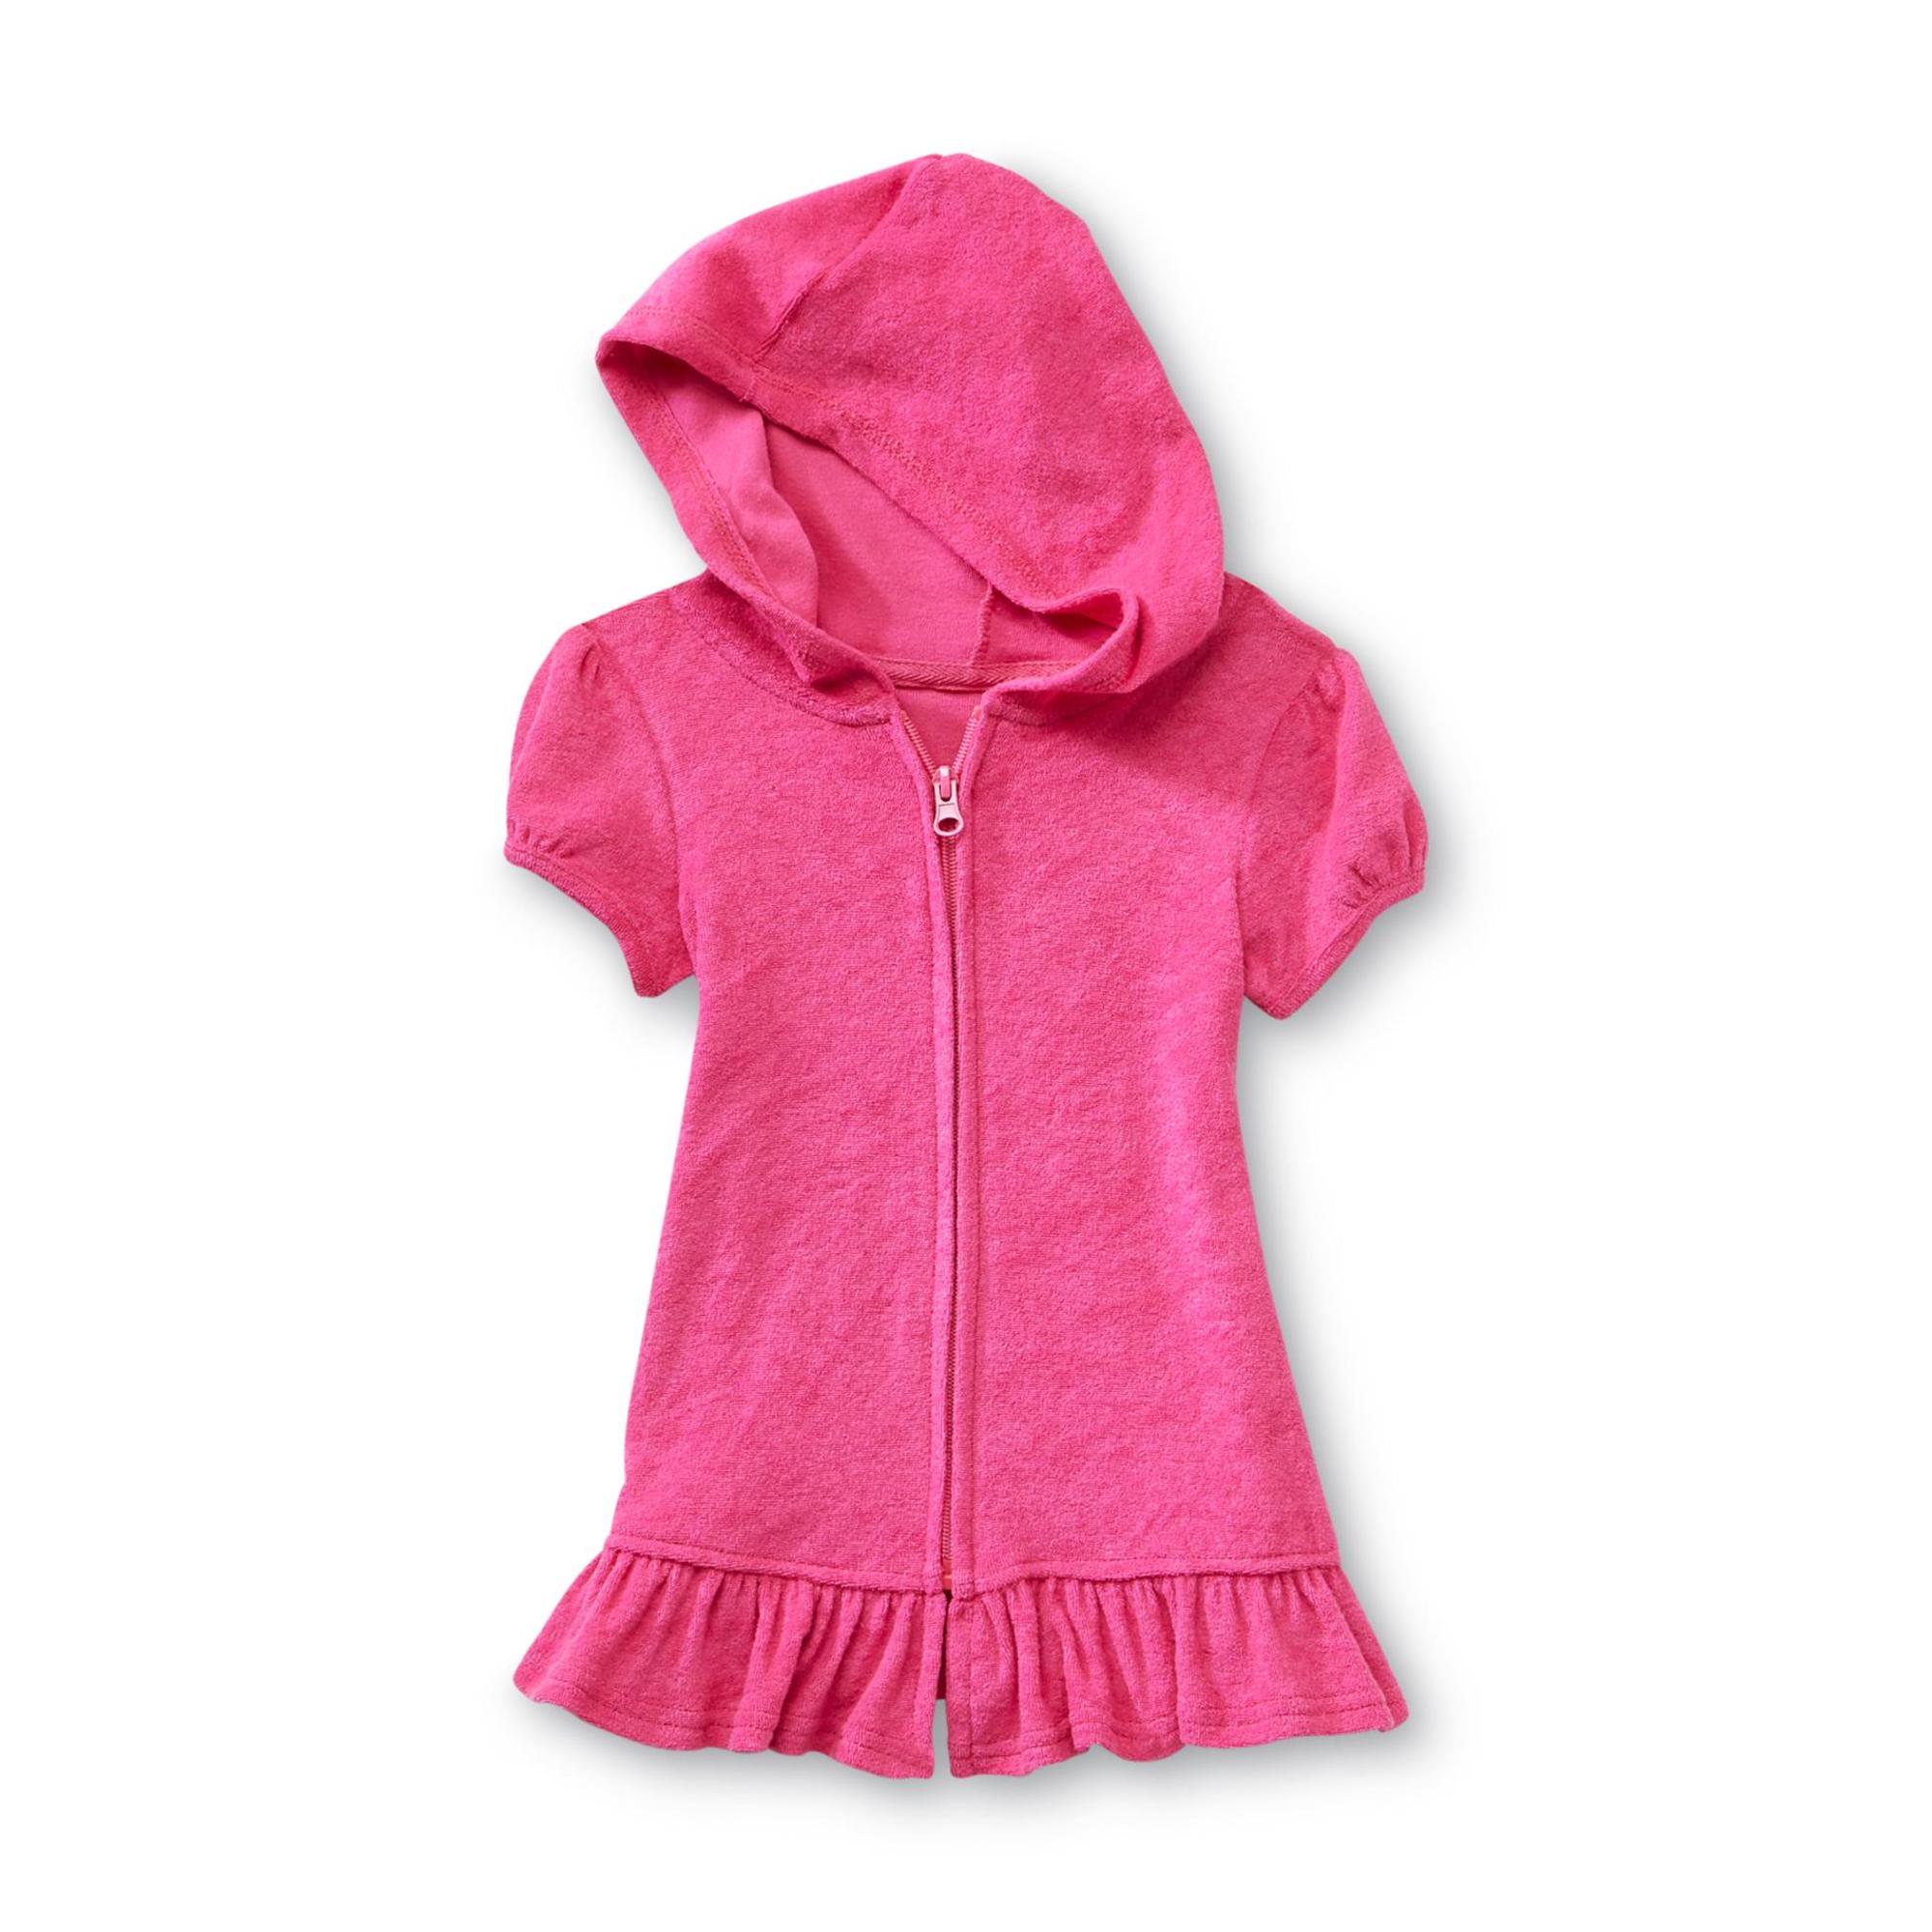 Joe Boxer Infant & Toddler Girl's Terry Cloth Swimsuit Cover-Up